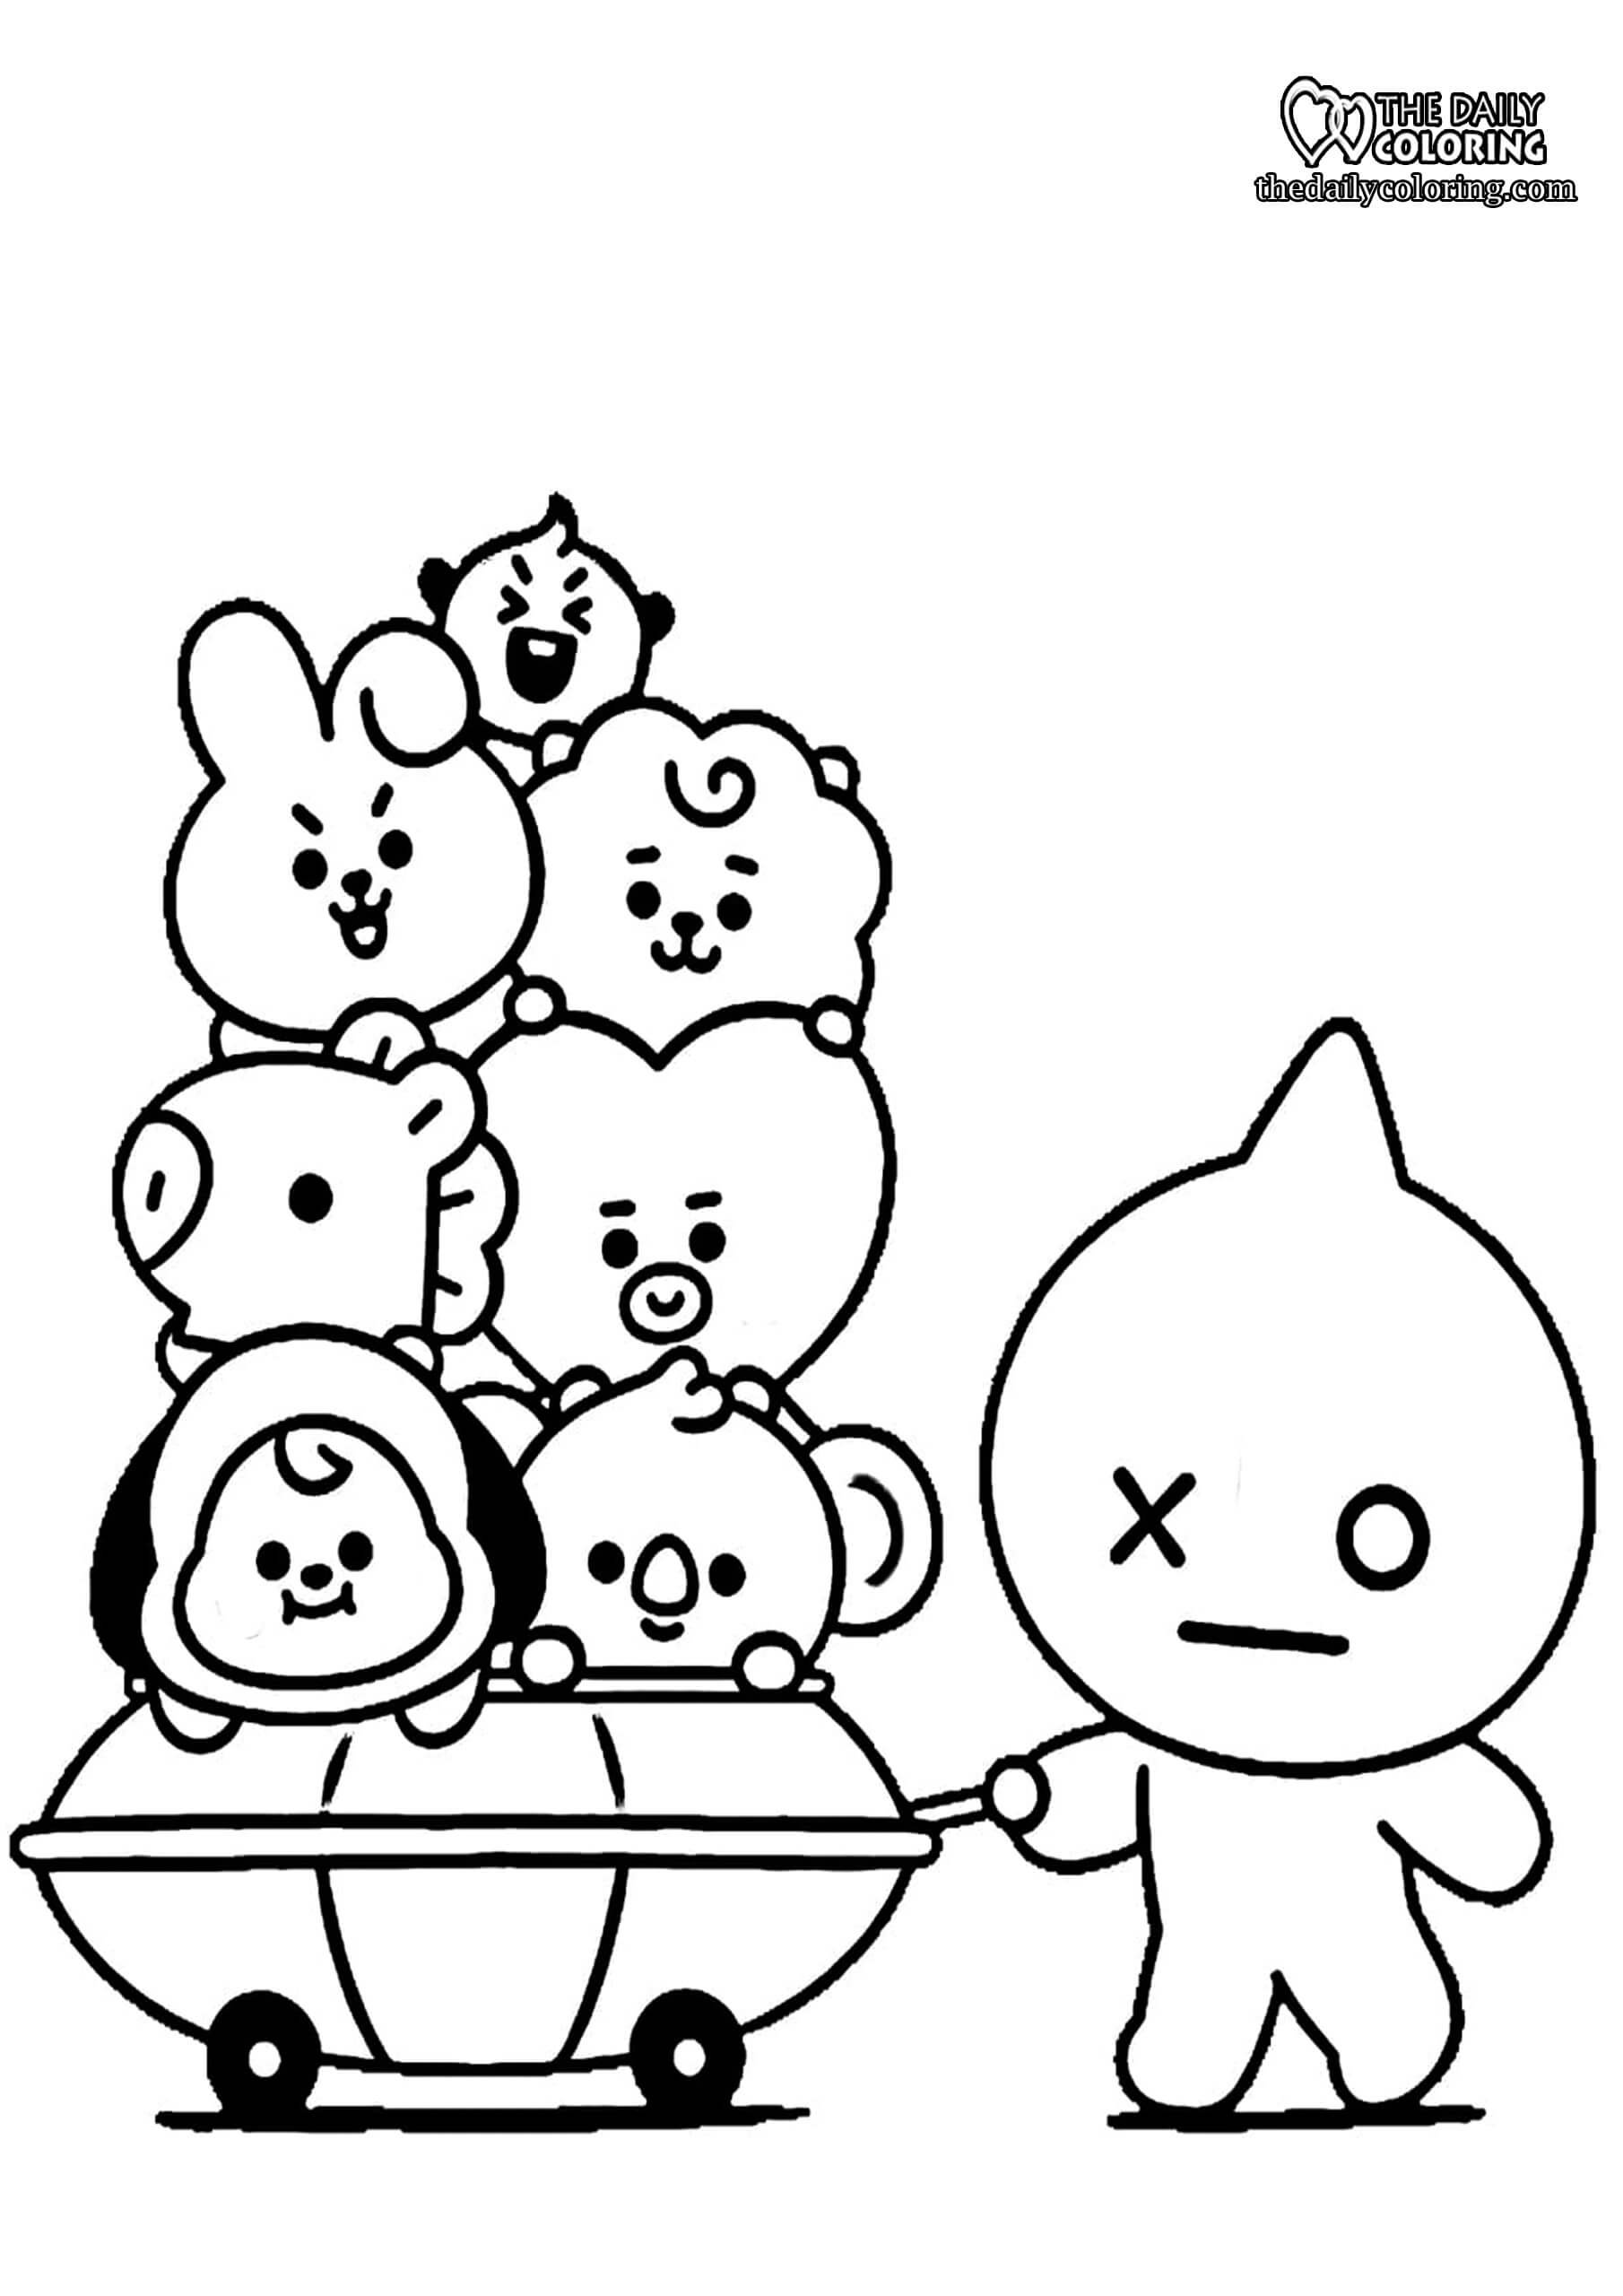 bt21 coloring page